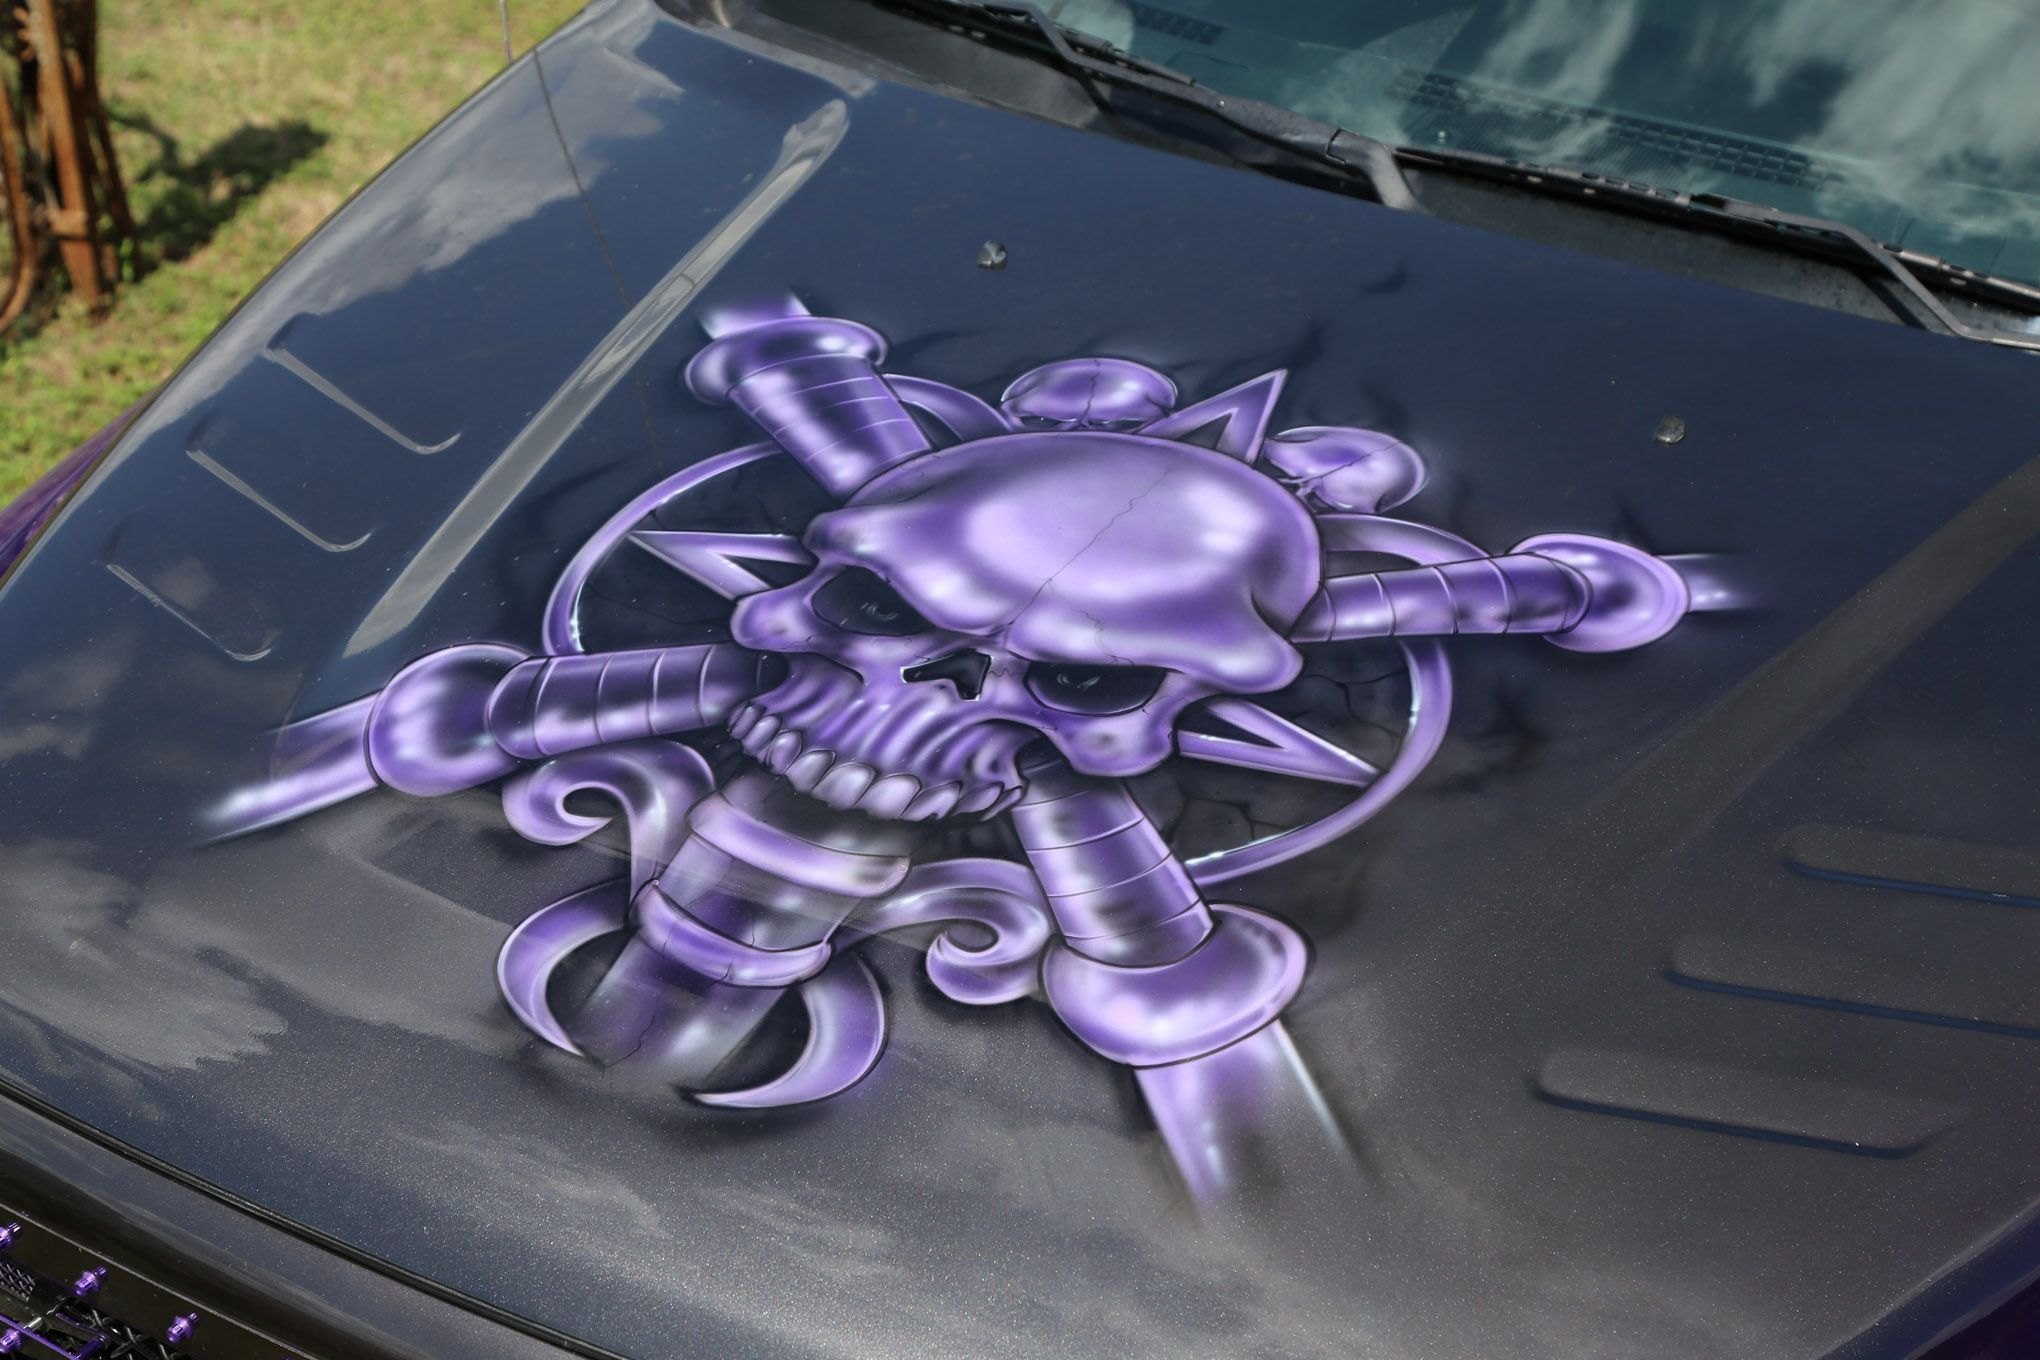 Purple Lifted Dodge Ram with Aftermarket Airbrushed Hood - Photo by Travis Haecker, Chris Castaneda